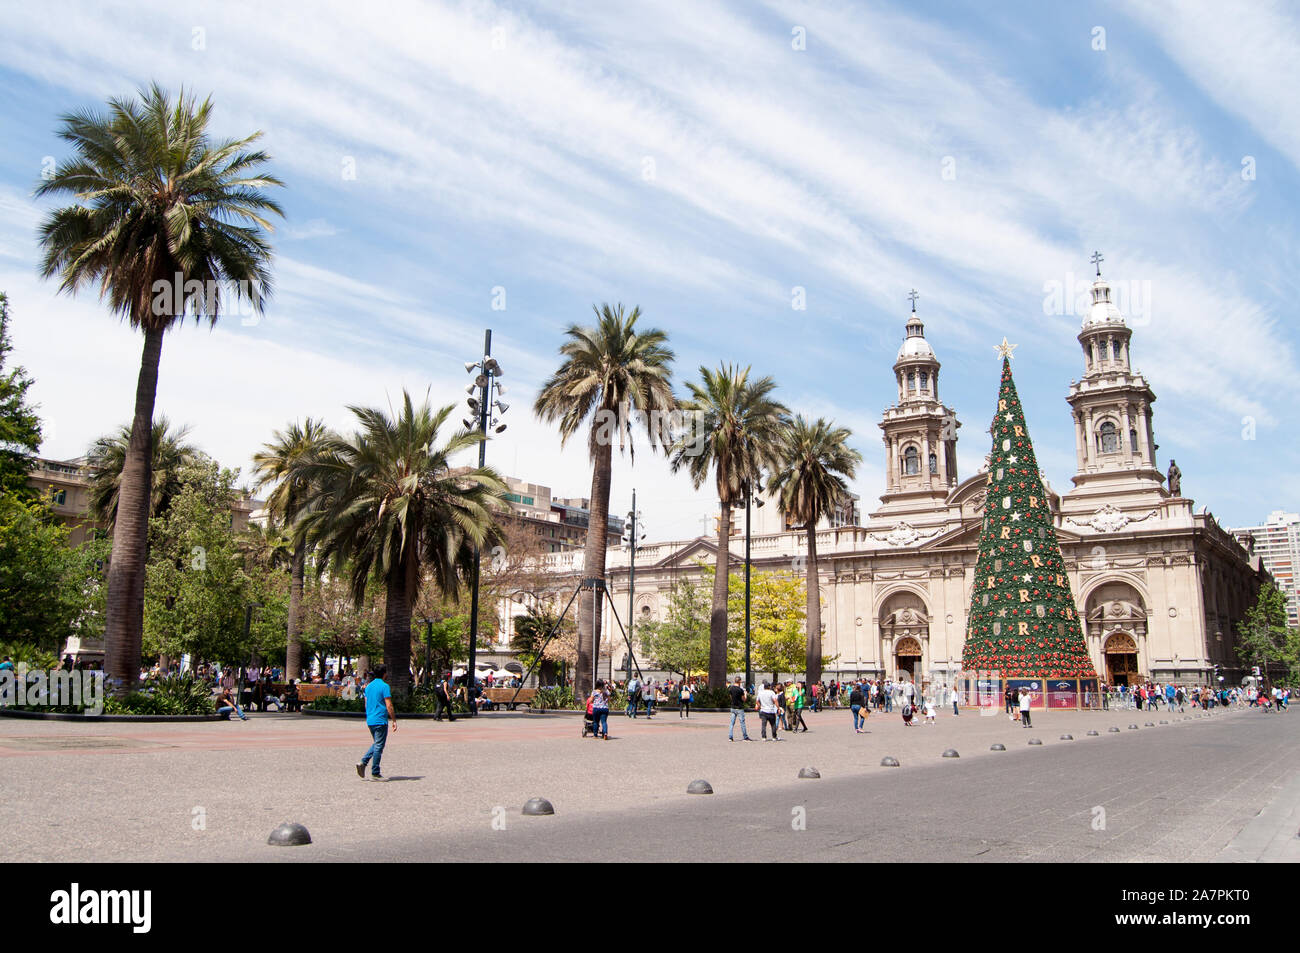 SANTIAGO, CHILE -  Plaza de Armas  is the main square of Santiago. Christams tree and people walking in the square. Stock Photo